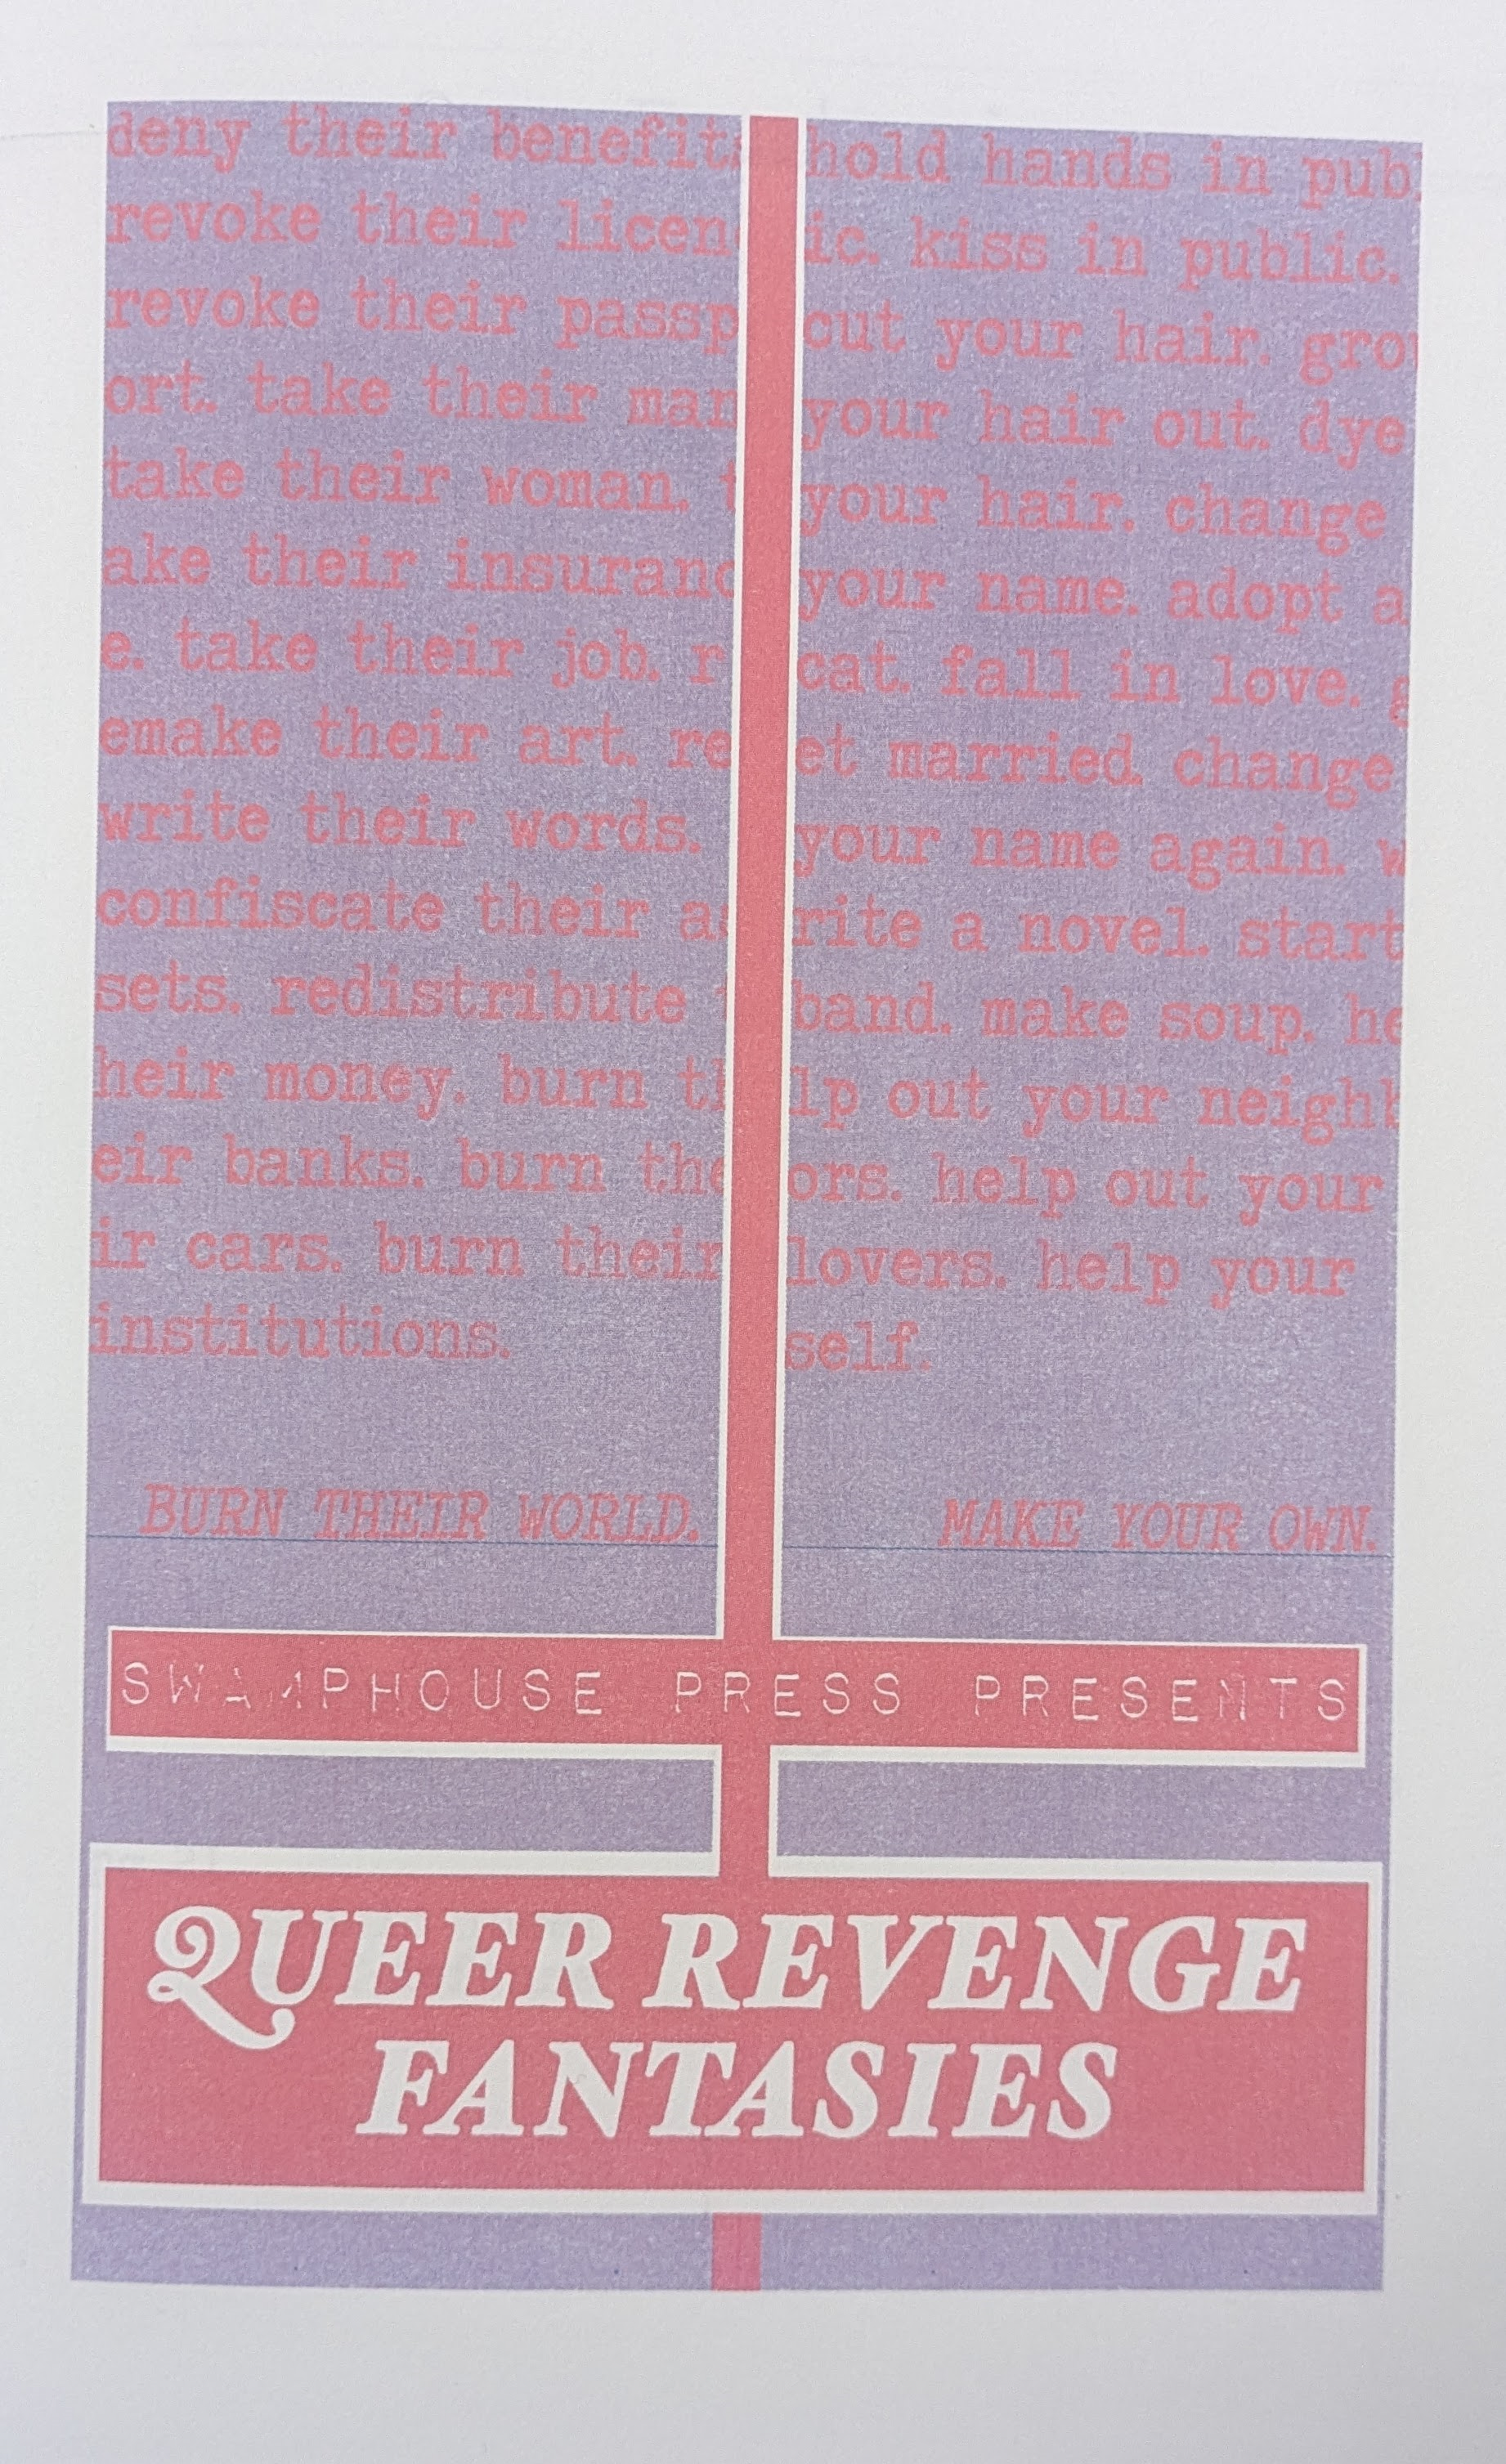 The cover of the zine “Queer Revenge Fantasies.” A list of fantasies, all blurring into each other, make up the first half of the cover page. The second half of the cover is dominated by the title.